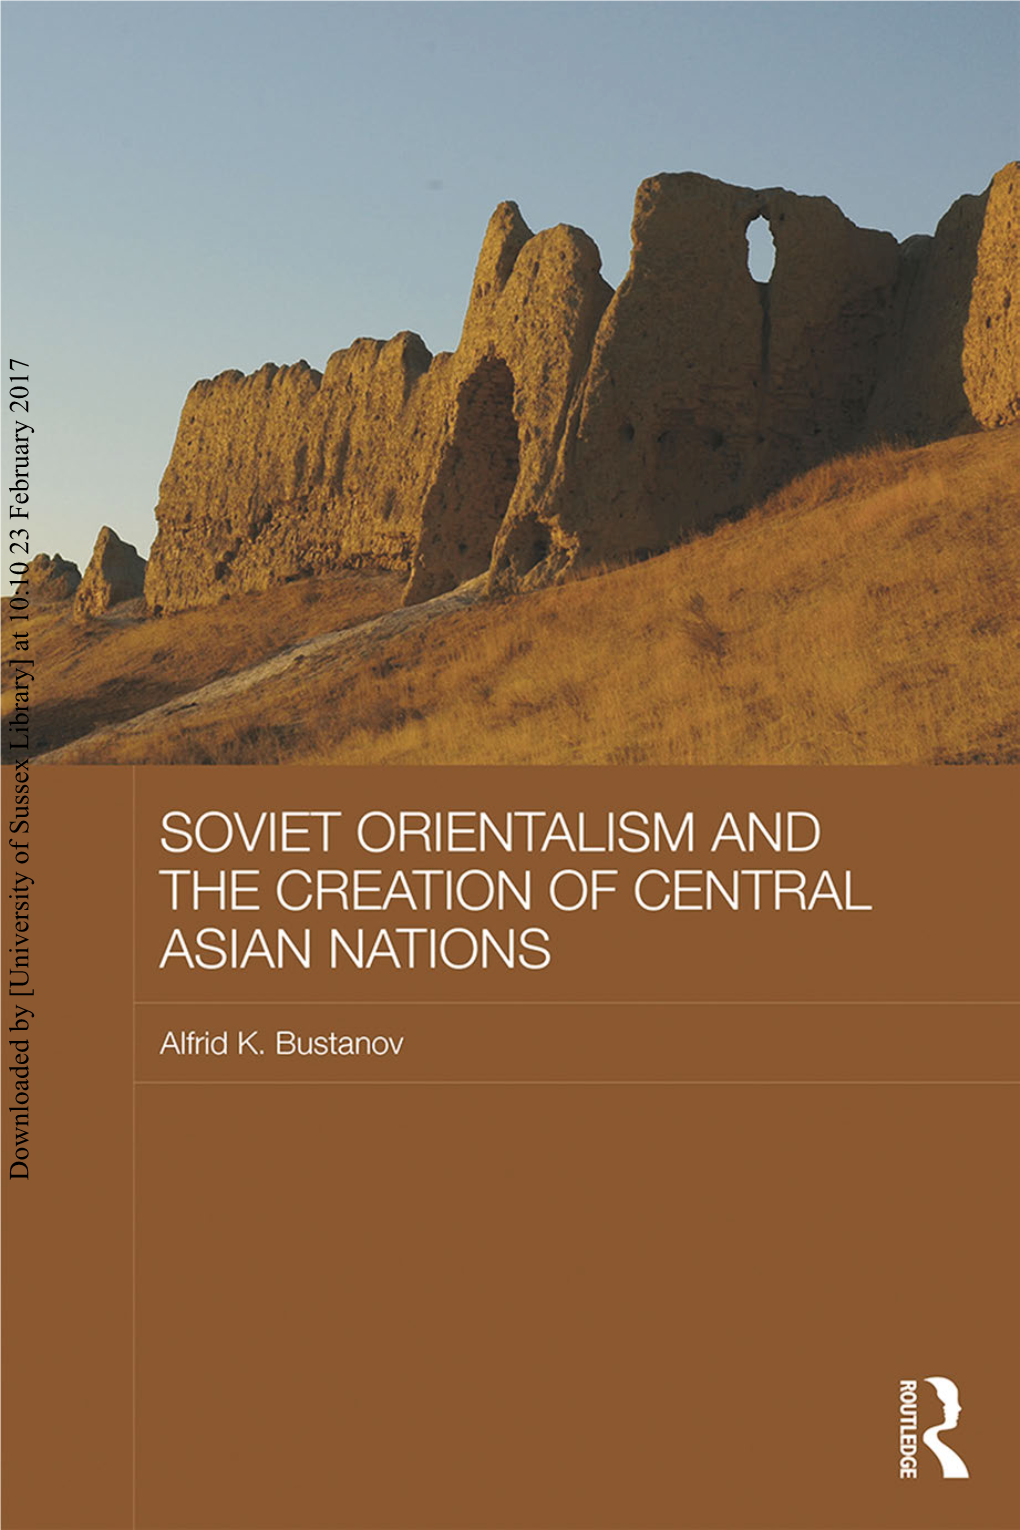 University of Sussex Library] at 10:10 23 February 2017 Soviet Orientalism and the Creation of Central Asian Nations